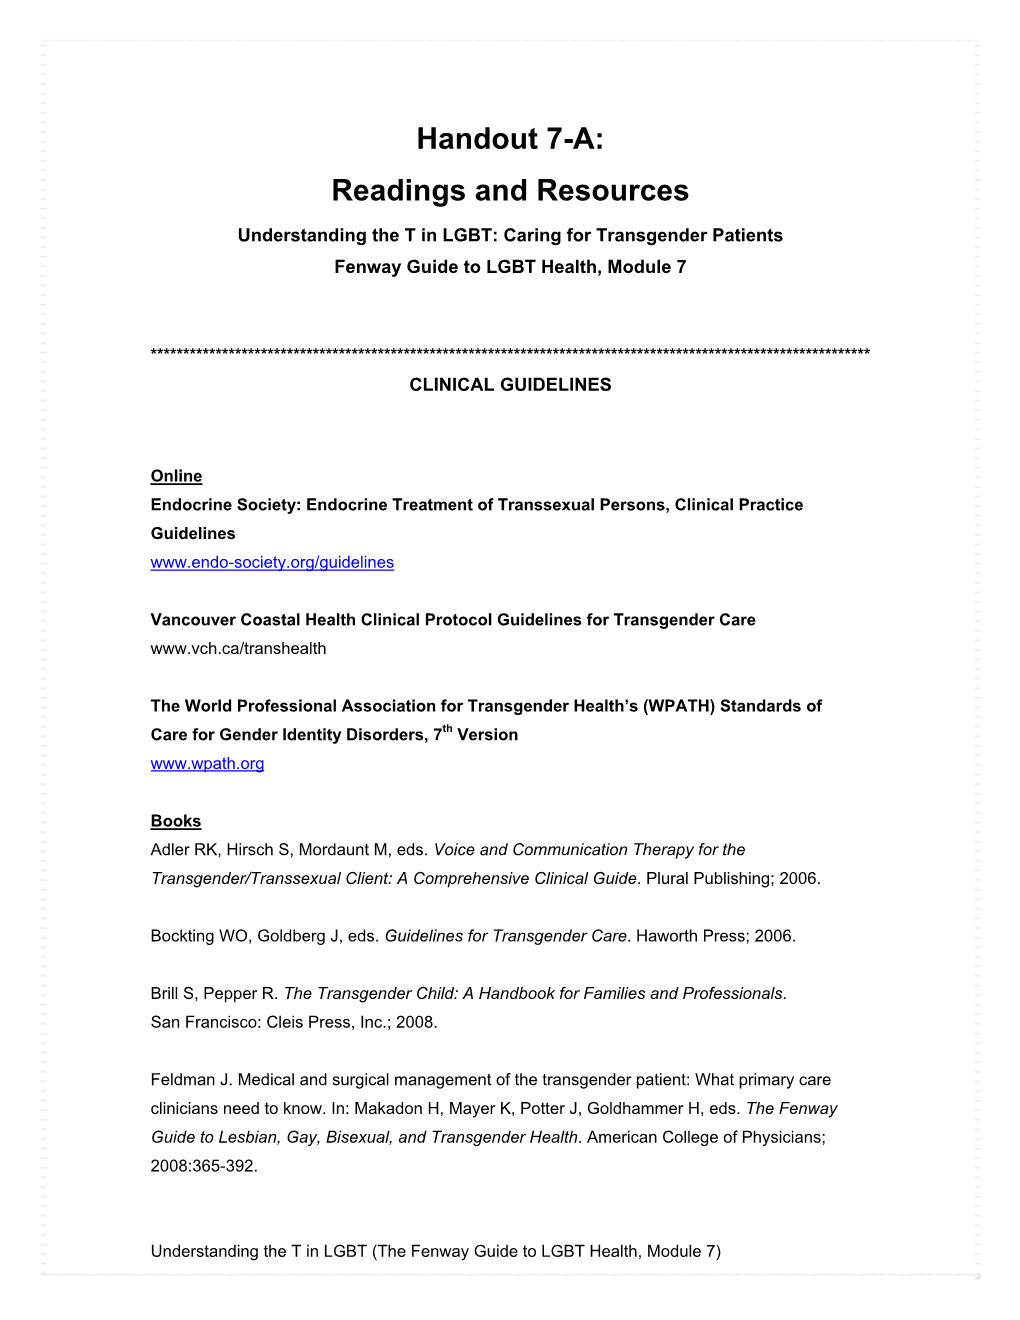 Handout 7-A: Readings and Resources